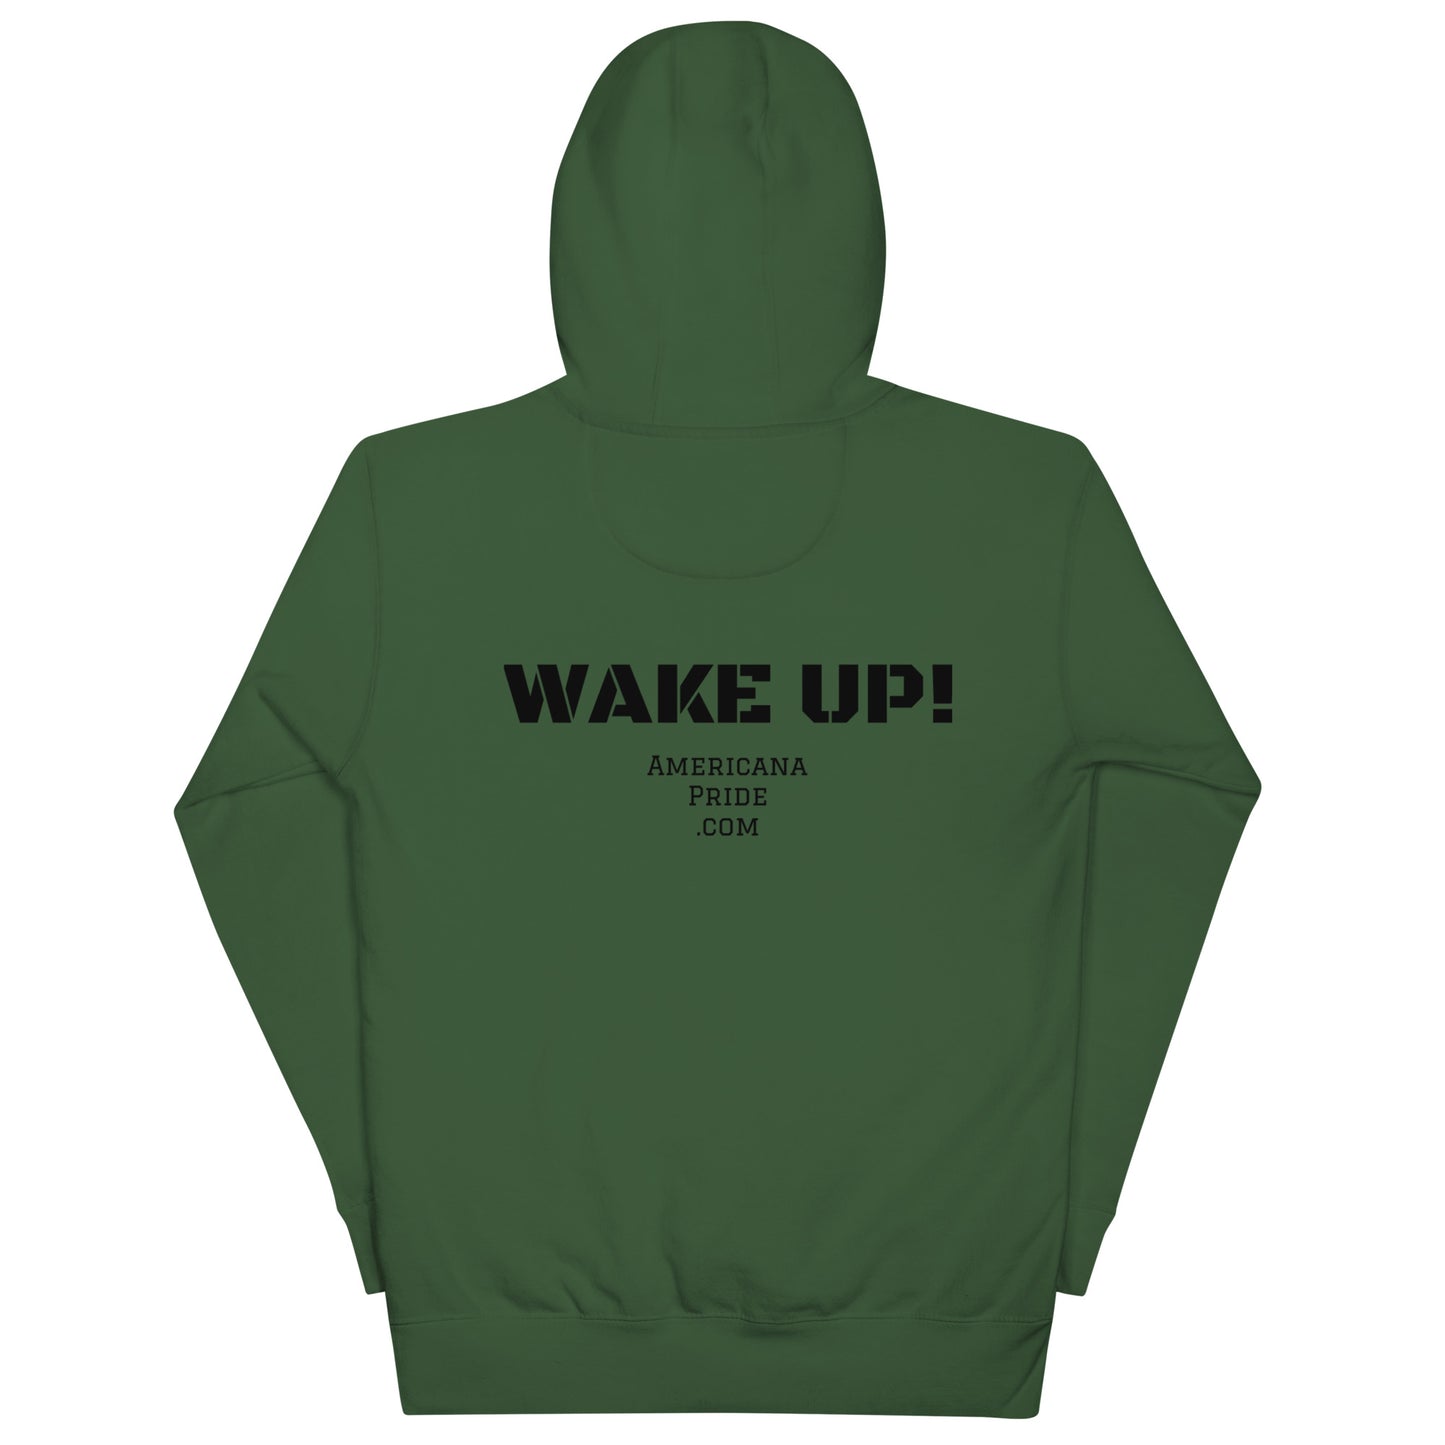 If you are not part of the Movement you are the movement - wake up! Unisex Hoodie (black lettering)